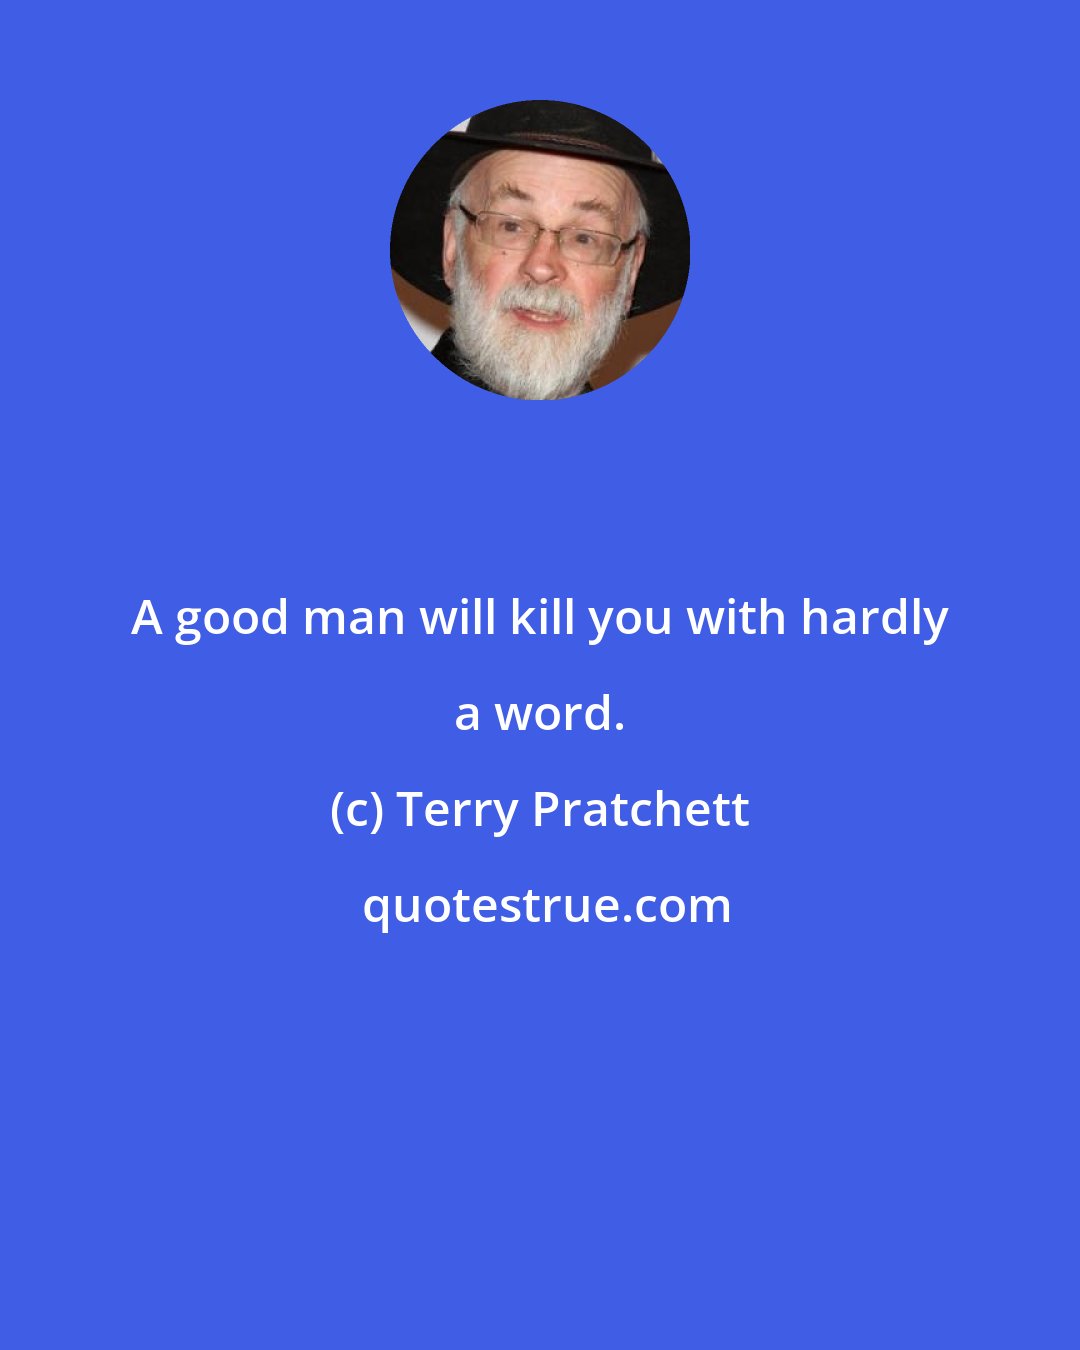 Terry Pratchett: A good man will kill you with hardly a word.